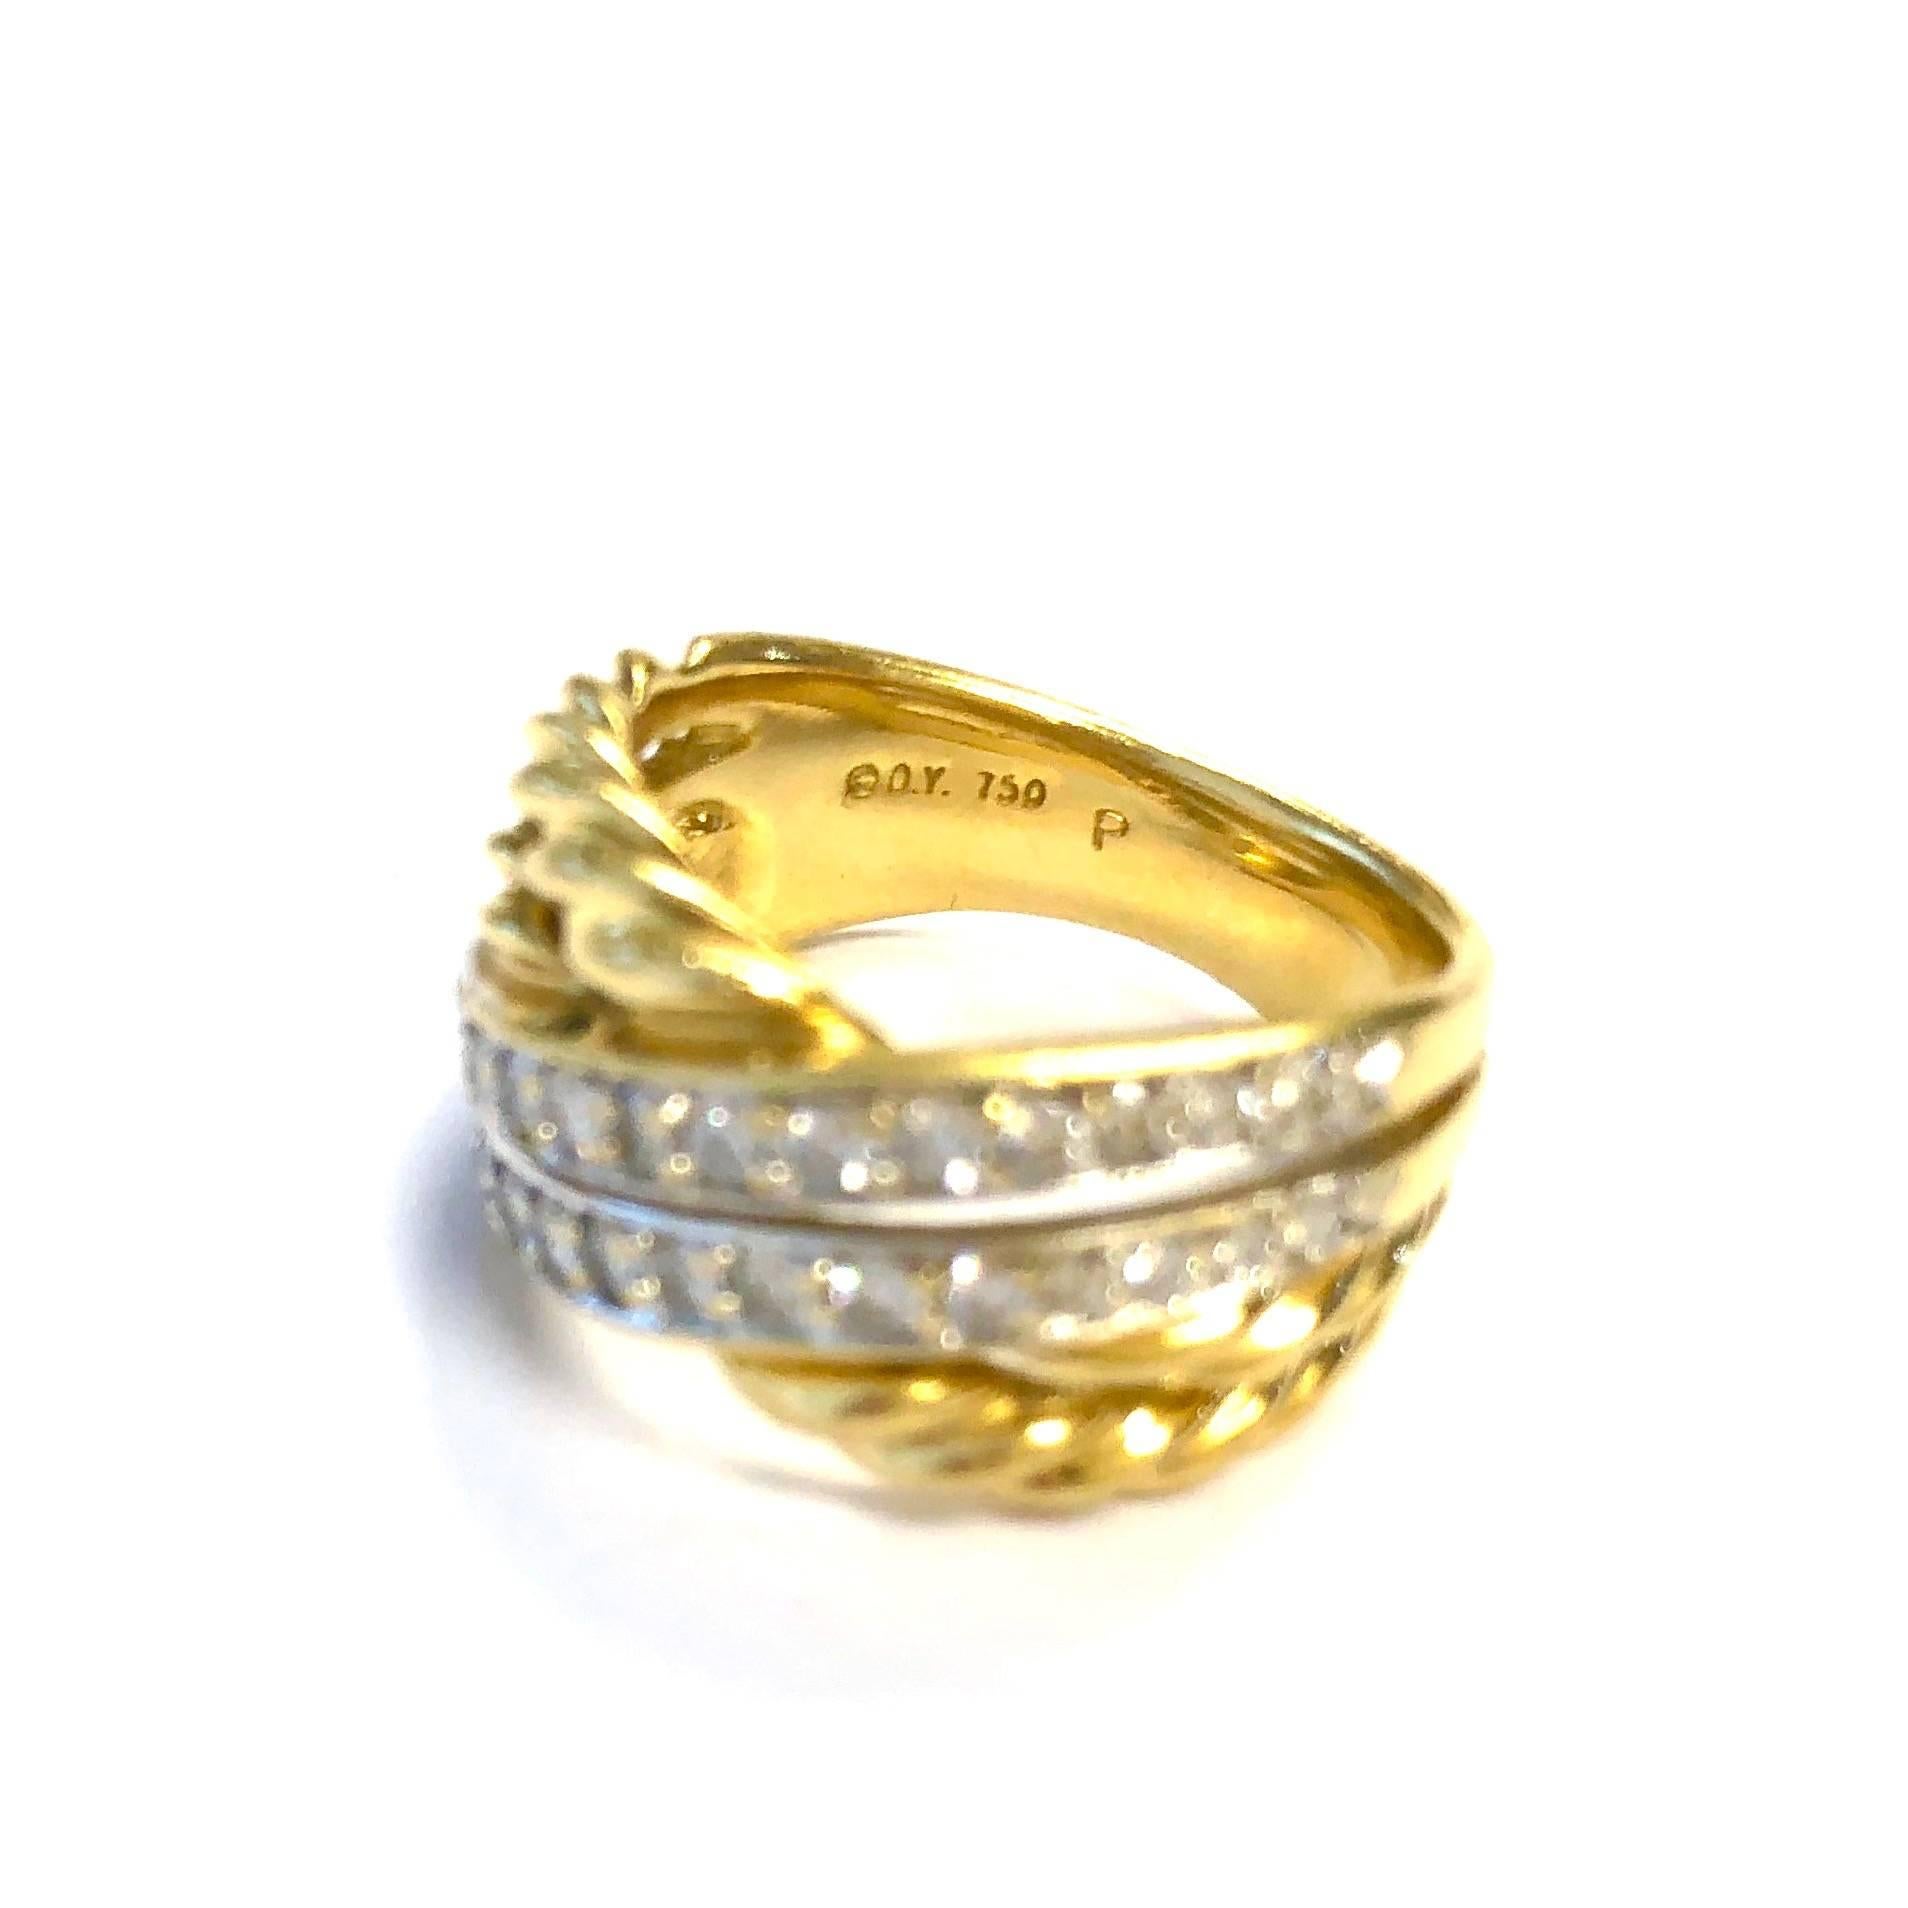 Elegant David Yurman diamond ring crafted in 18K yellow gold. The band displays a rope inspired crossover design set with 30 round brilliant cut diamonds, approximate total weight of 0.75ct, Color: G-H, Clarity: VS1-VS2.
This refined ring also